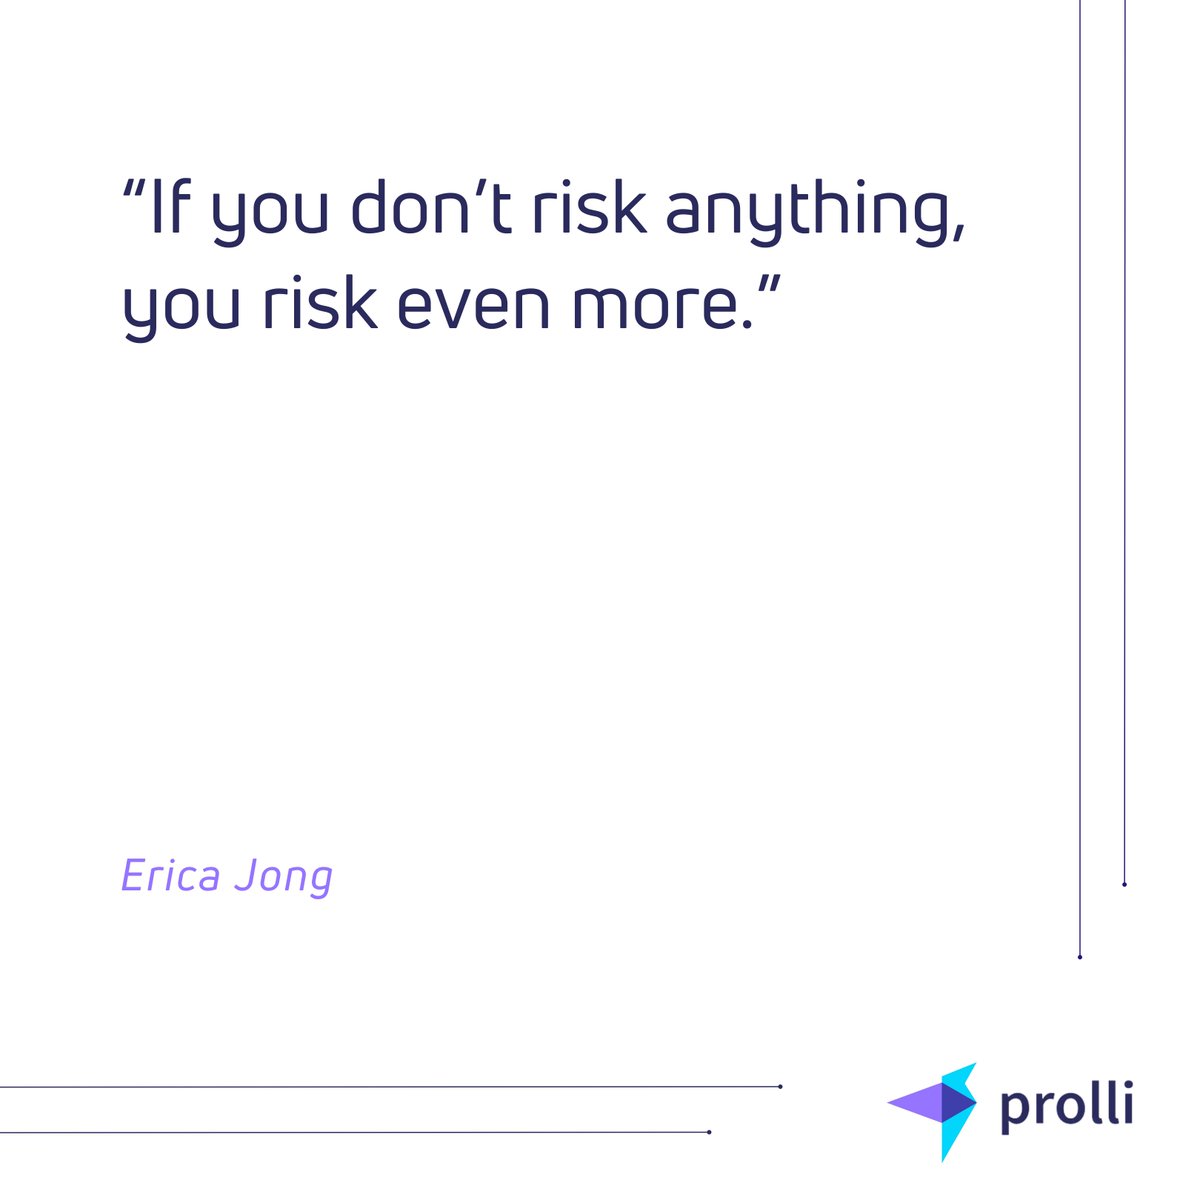 Don't miss out on valuable insights and updates – Follow @prolliapp and be part of the journey as we approach our app/play store launch!!!

#QuoteOfTheDay #InspirationalQuotes #MotivationalQuotes #LifeQuotes #PositiveQuotes #Wisdom #WordsOfWisdom #DailyQuotes #prolli #ericajong